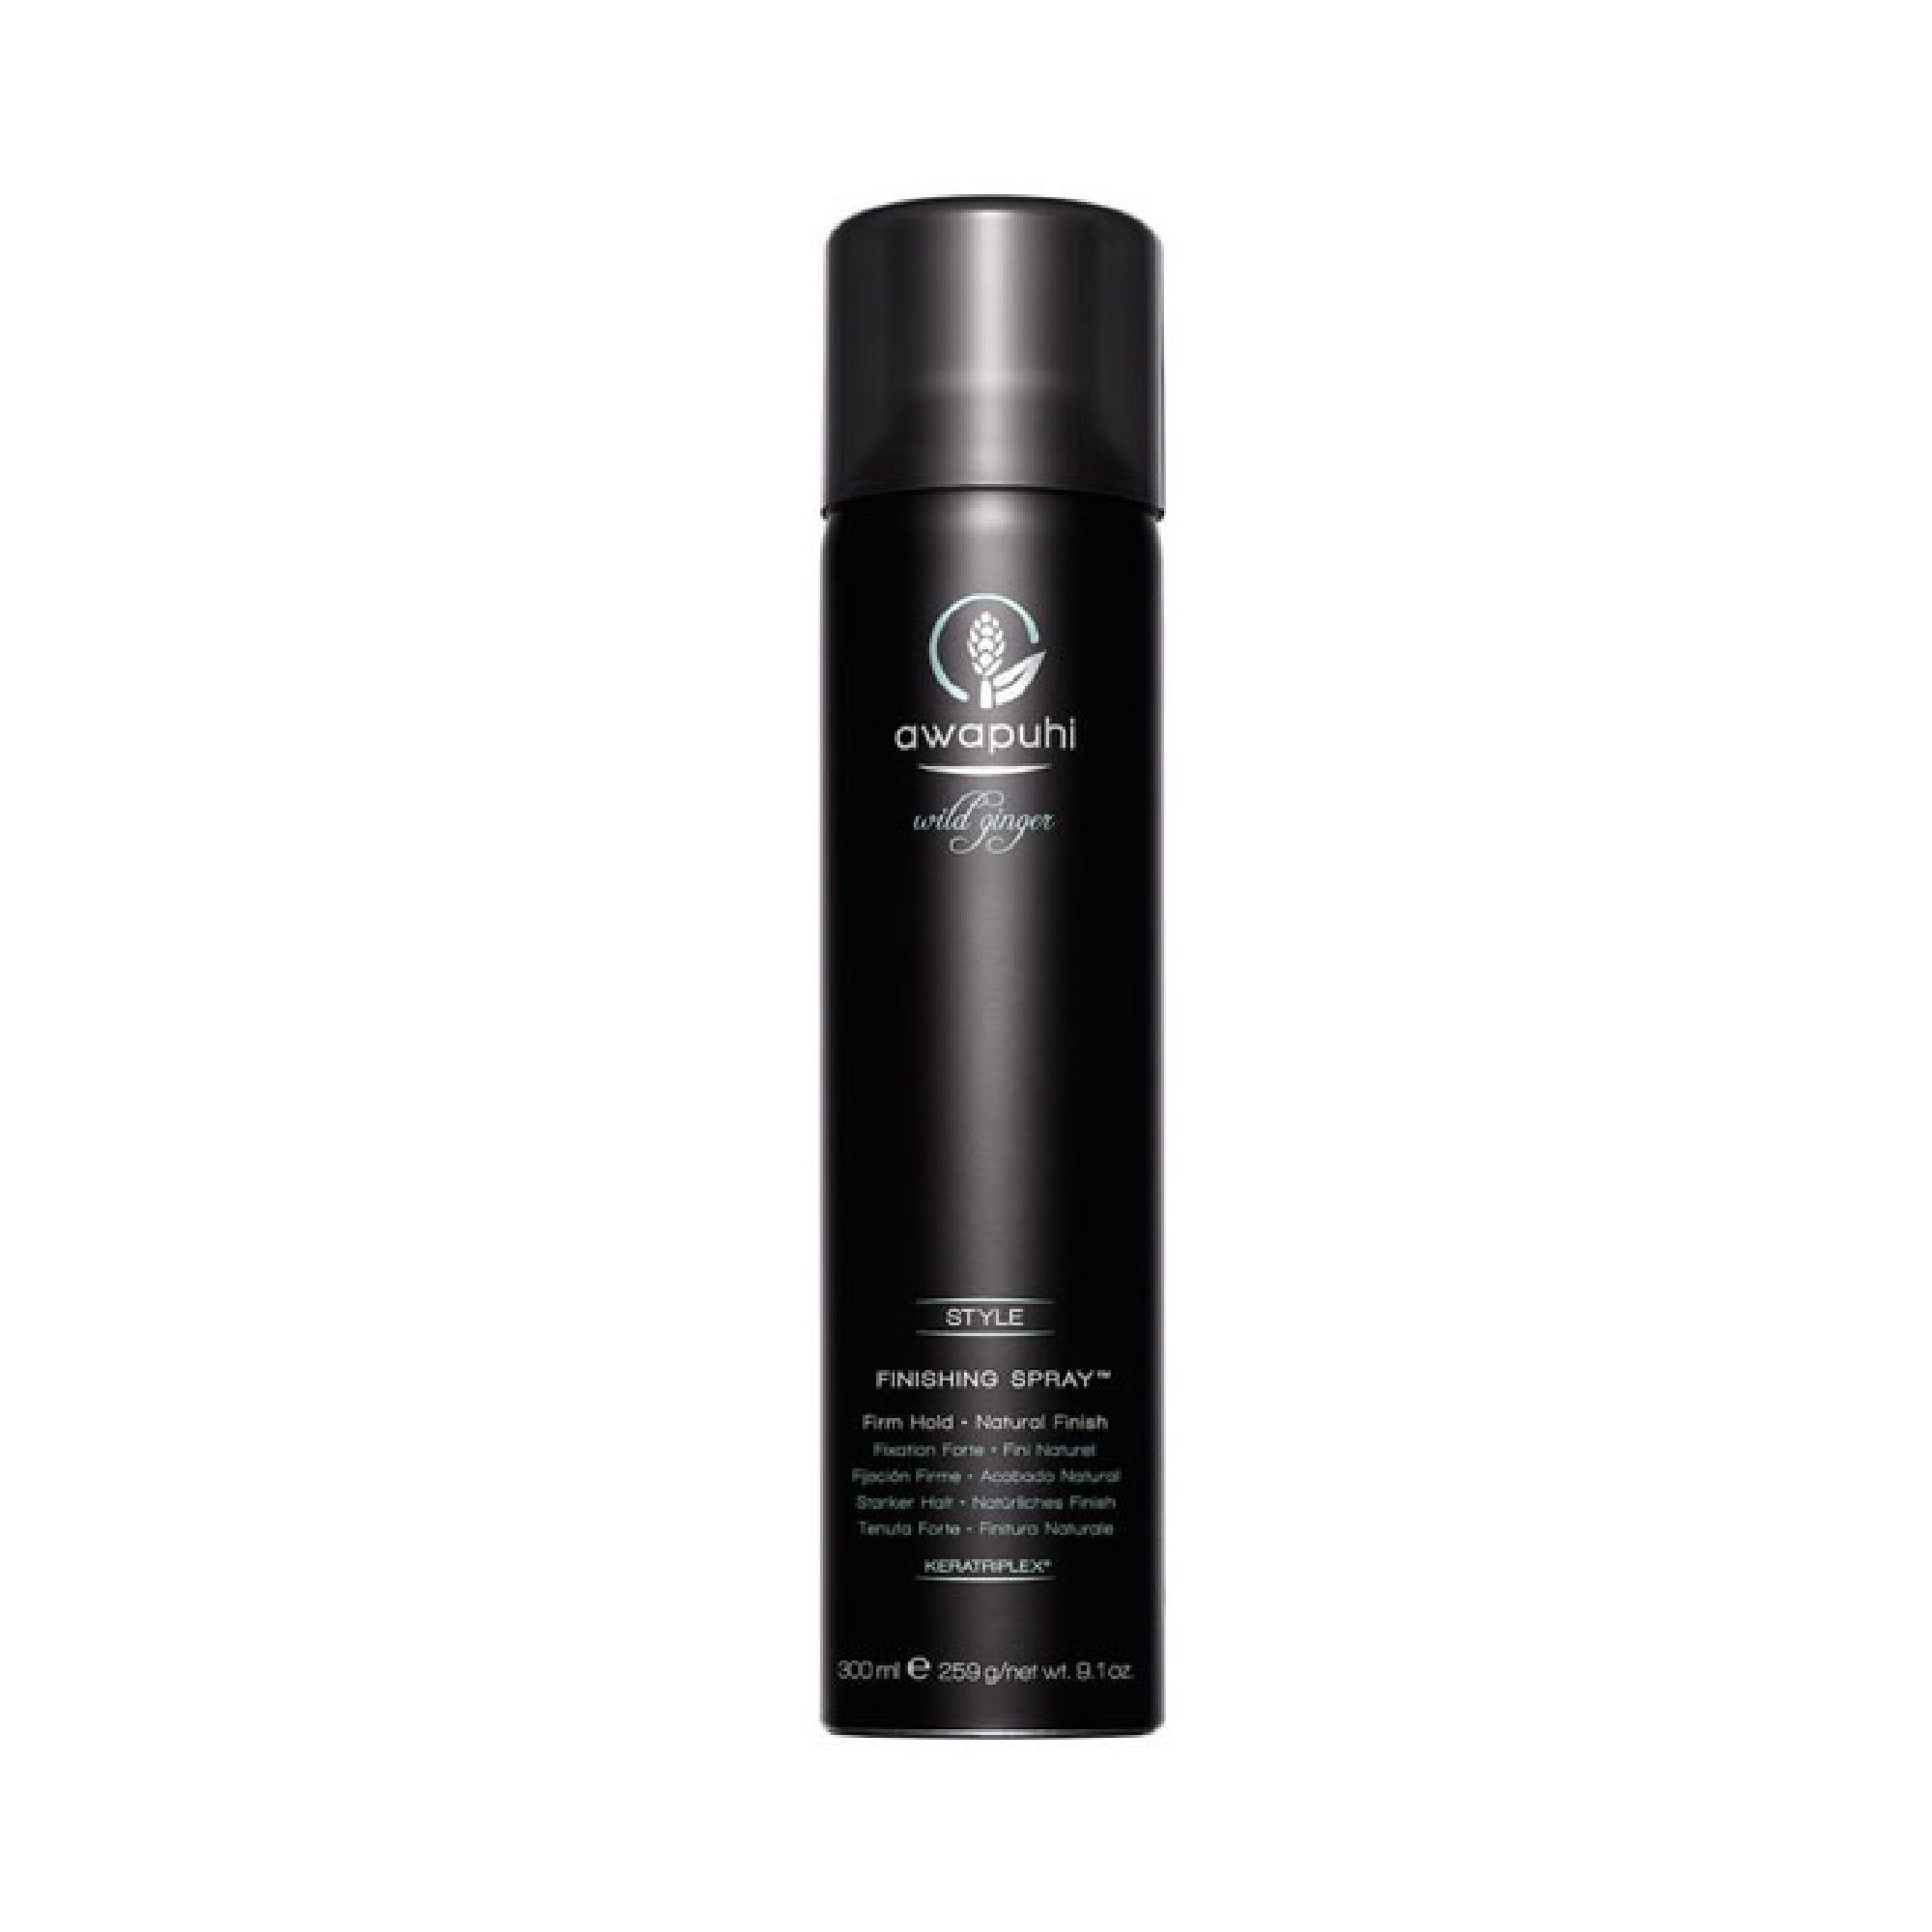 Paul Mitchell Awapuhi Finishing Spray 300ml - Hair products New Zealand |  Nation wide hairdressing & hair care group